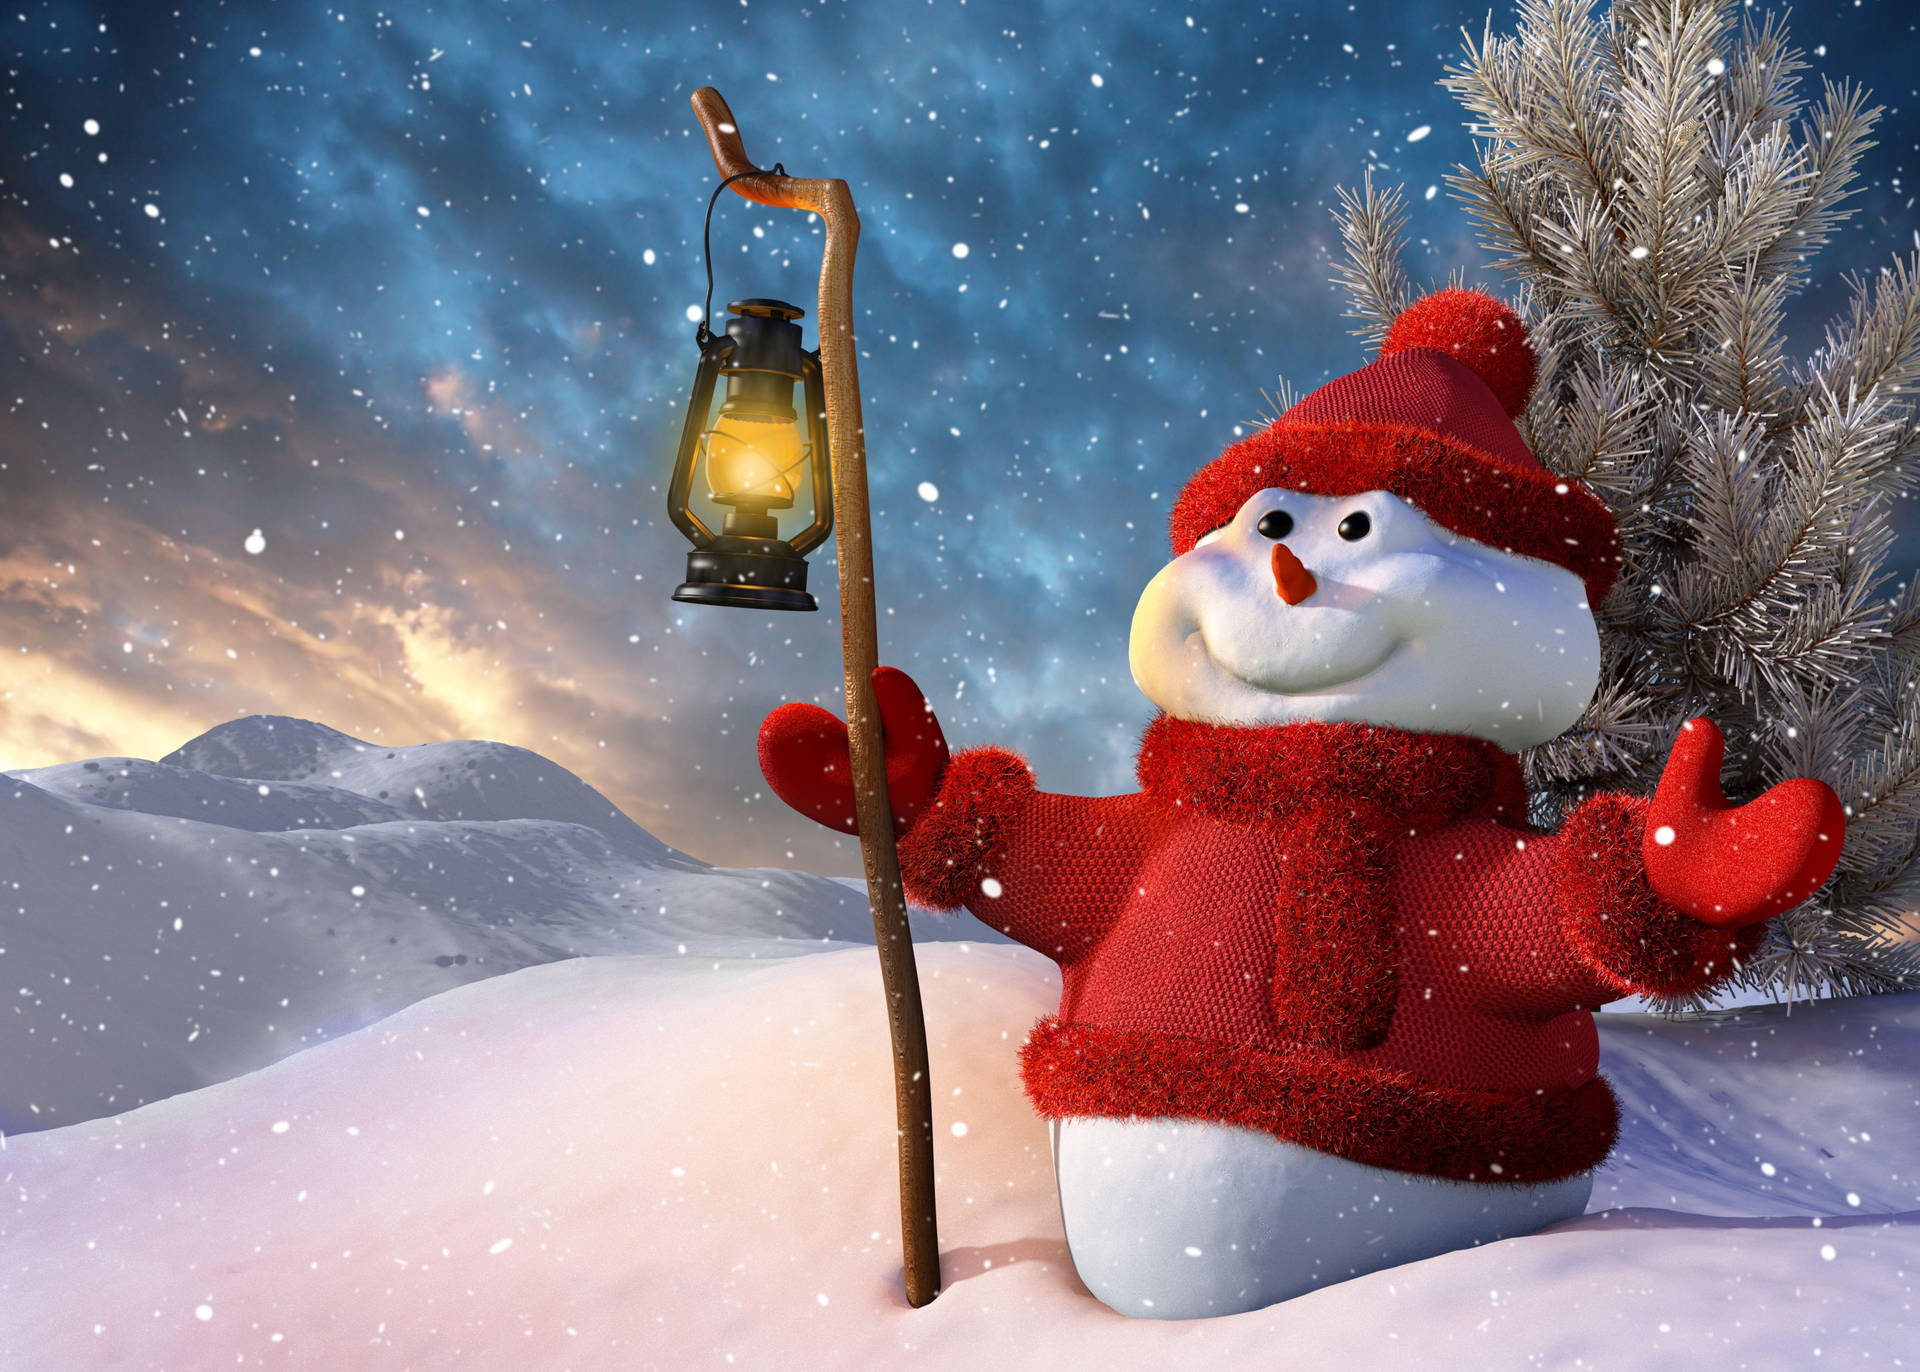 Christmas And New Year's Smiling Snowman With Lamp